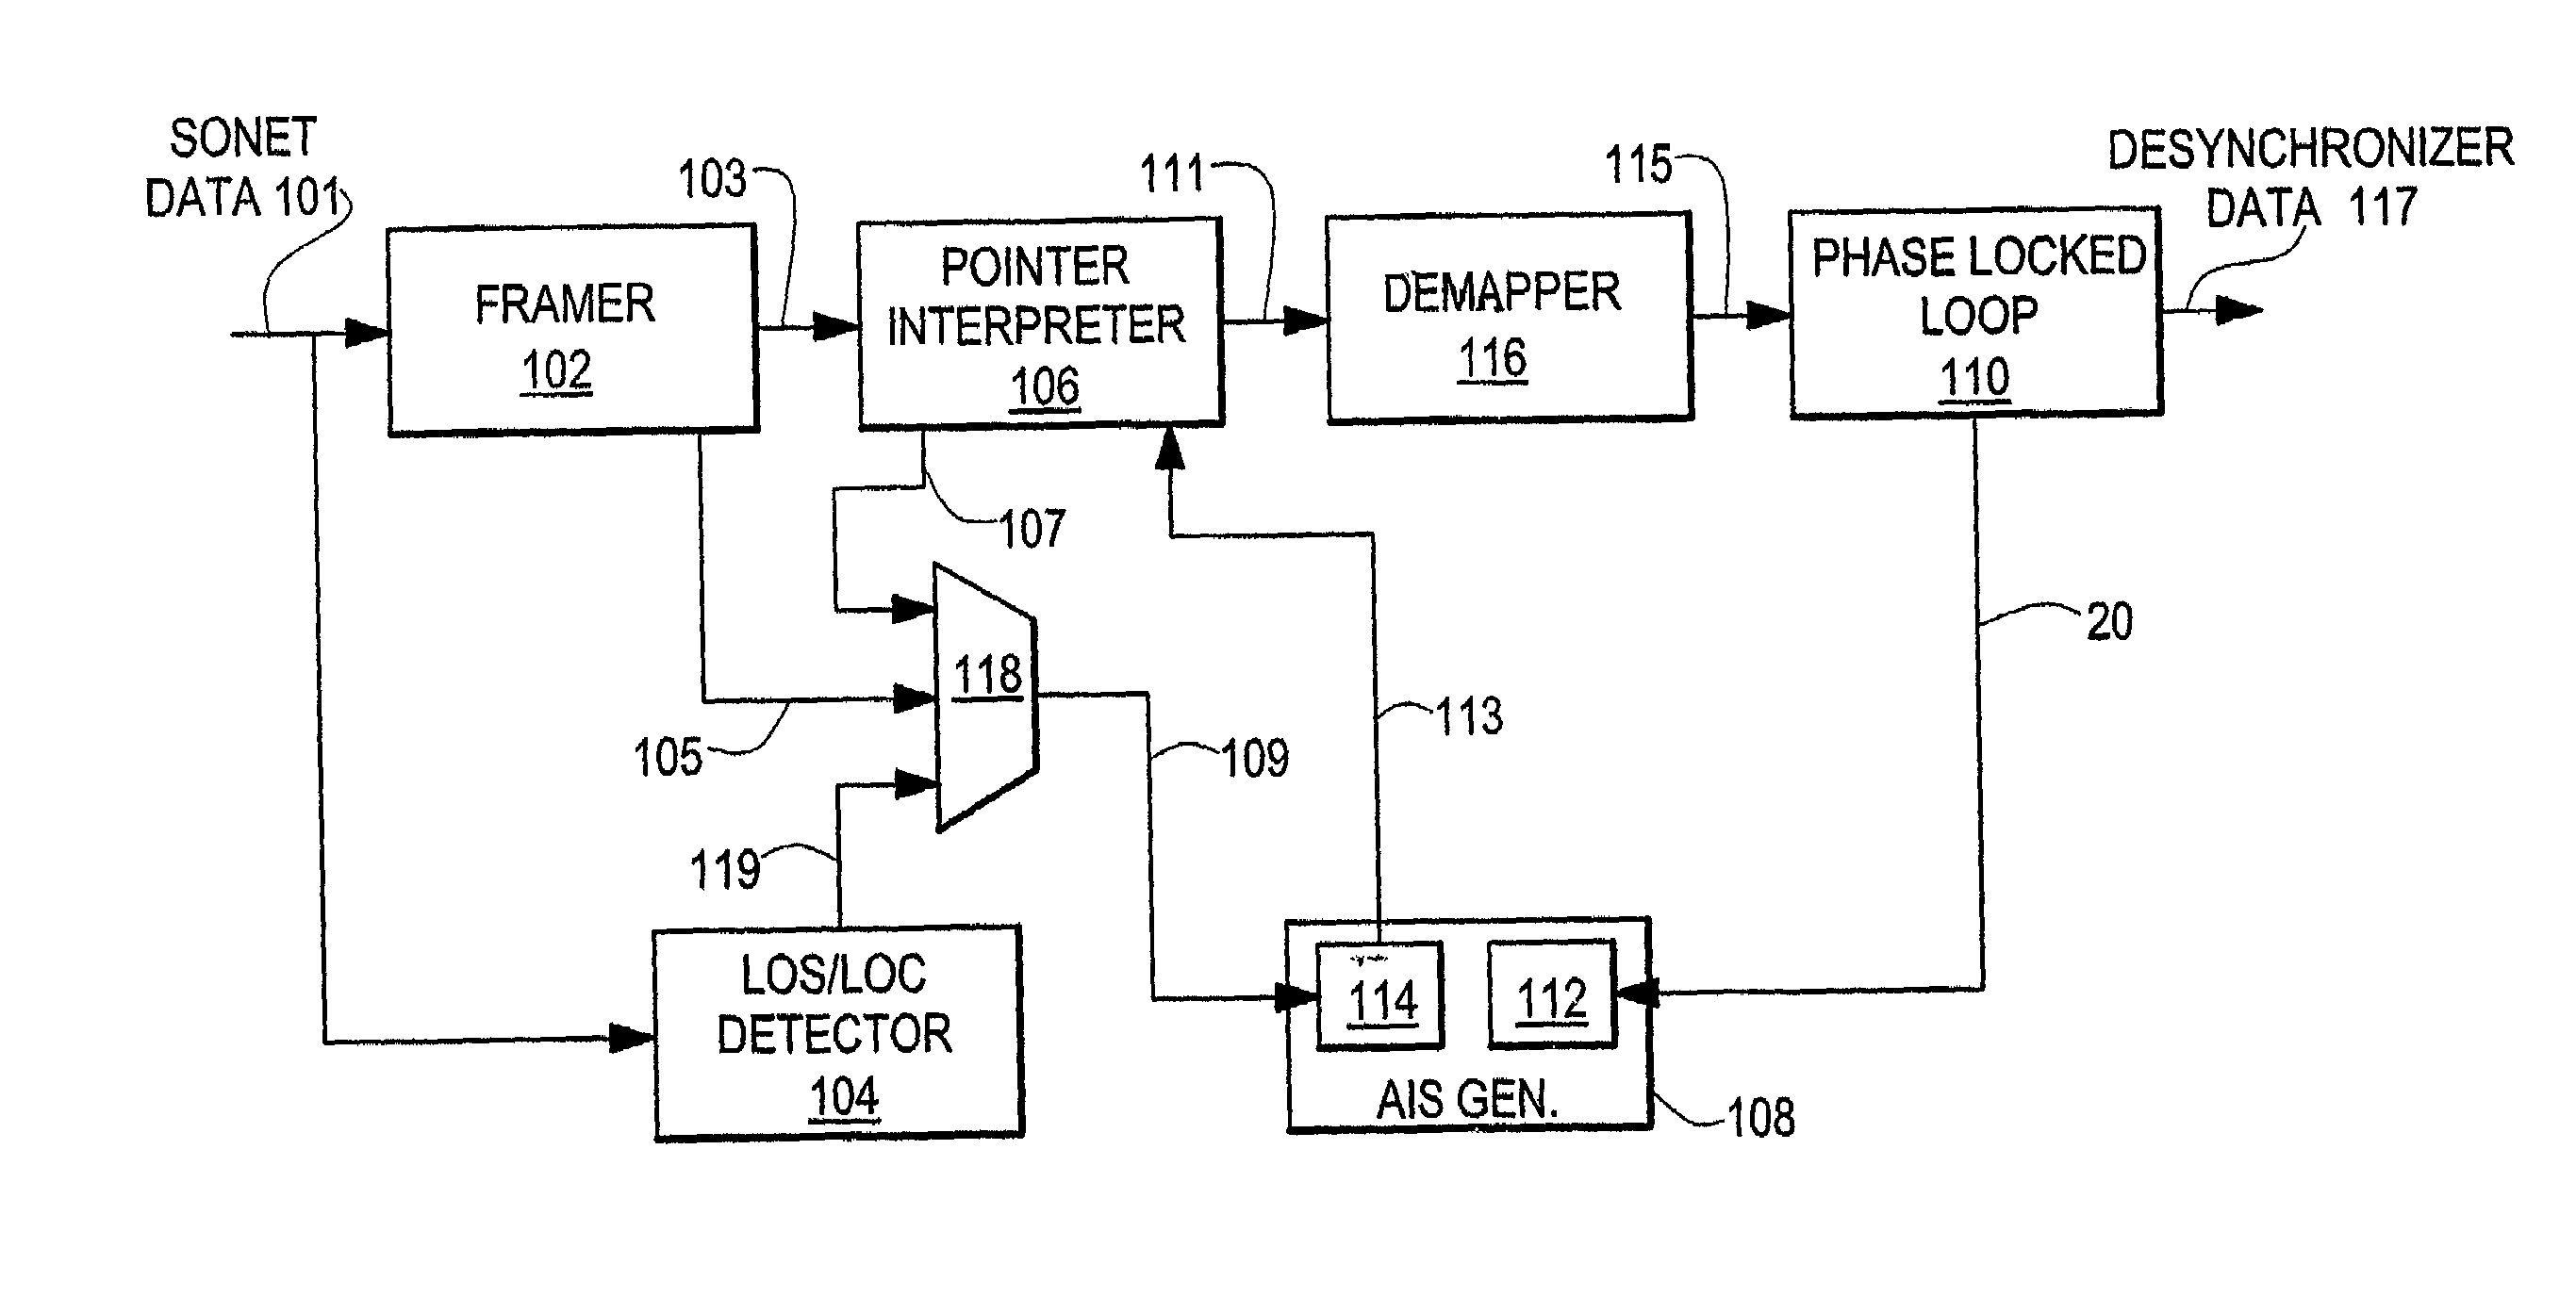 Method and apparatus for improving data integrity and desynchronizer recovery time after a loss of signal